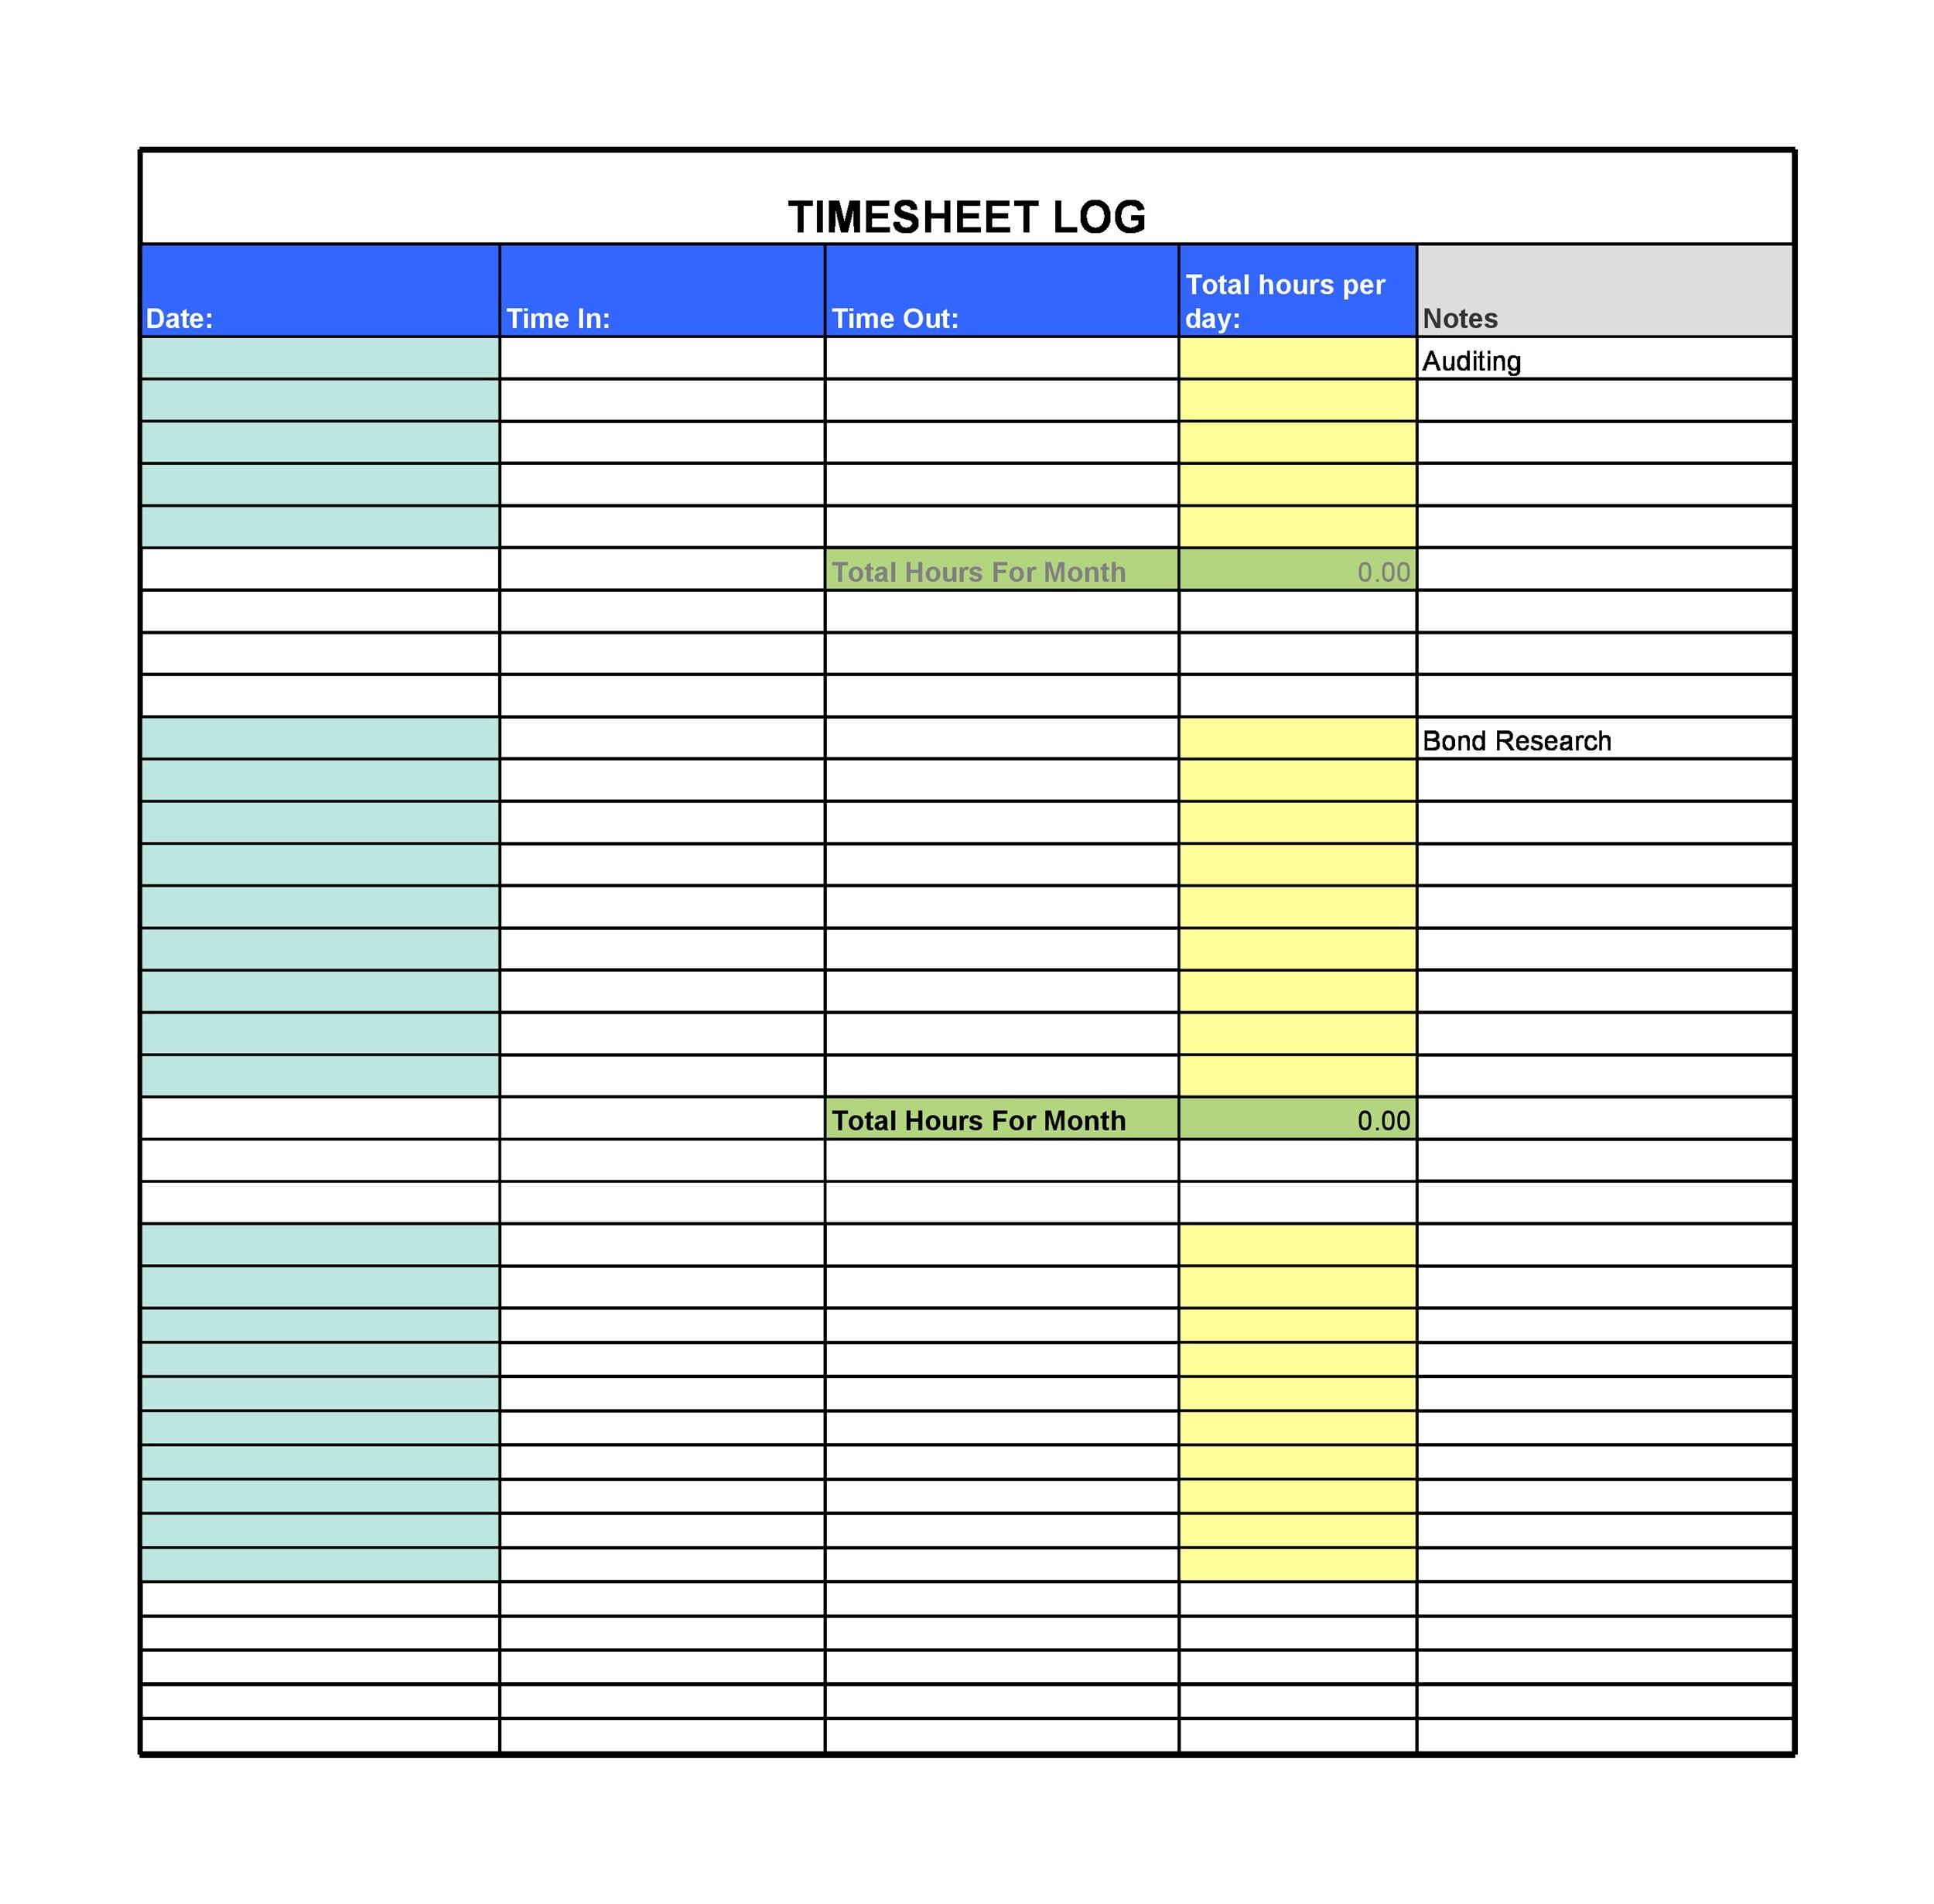 40 Free Timesheet Templates [in Excel] ᐅ TemplateLab